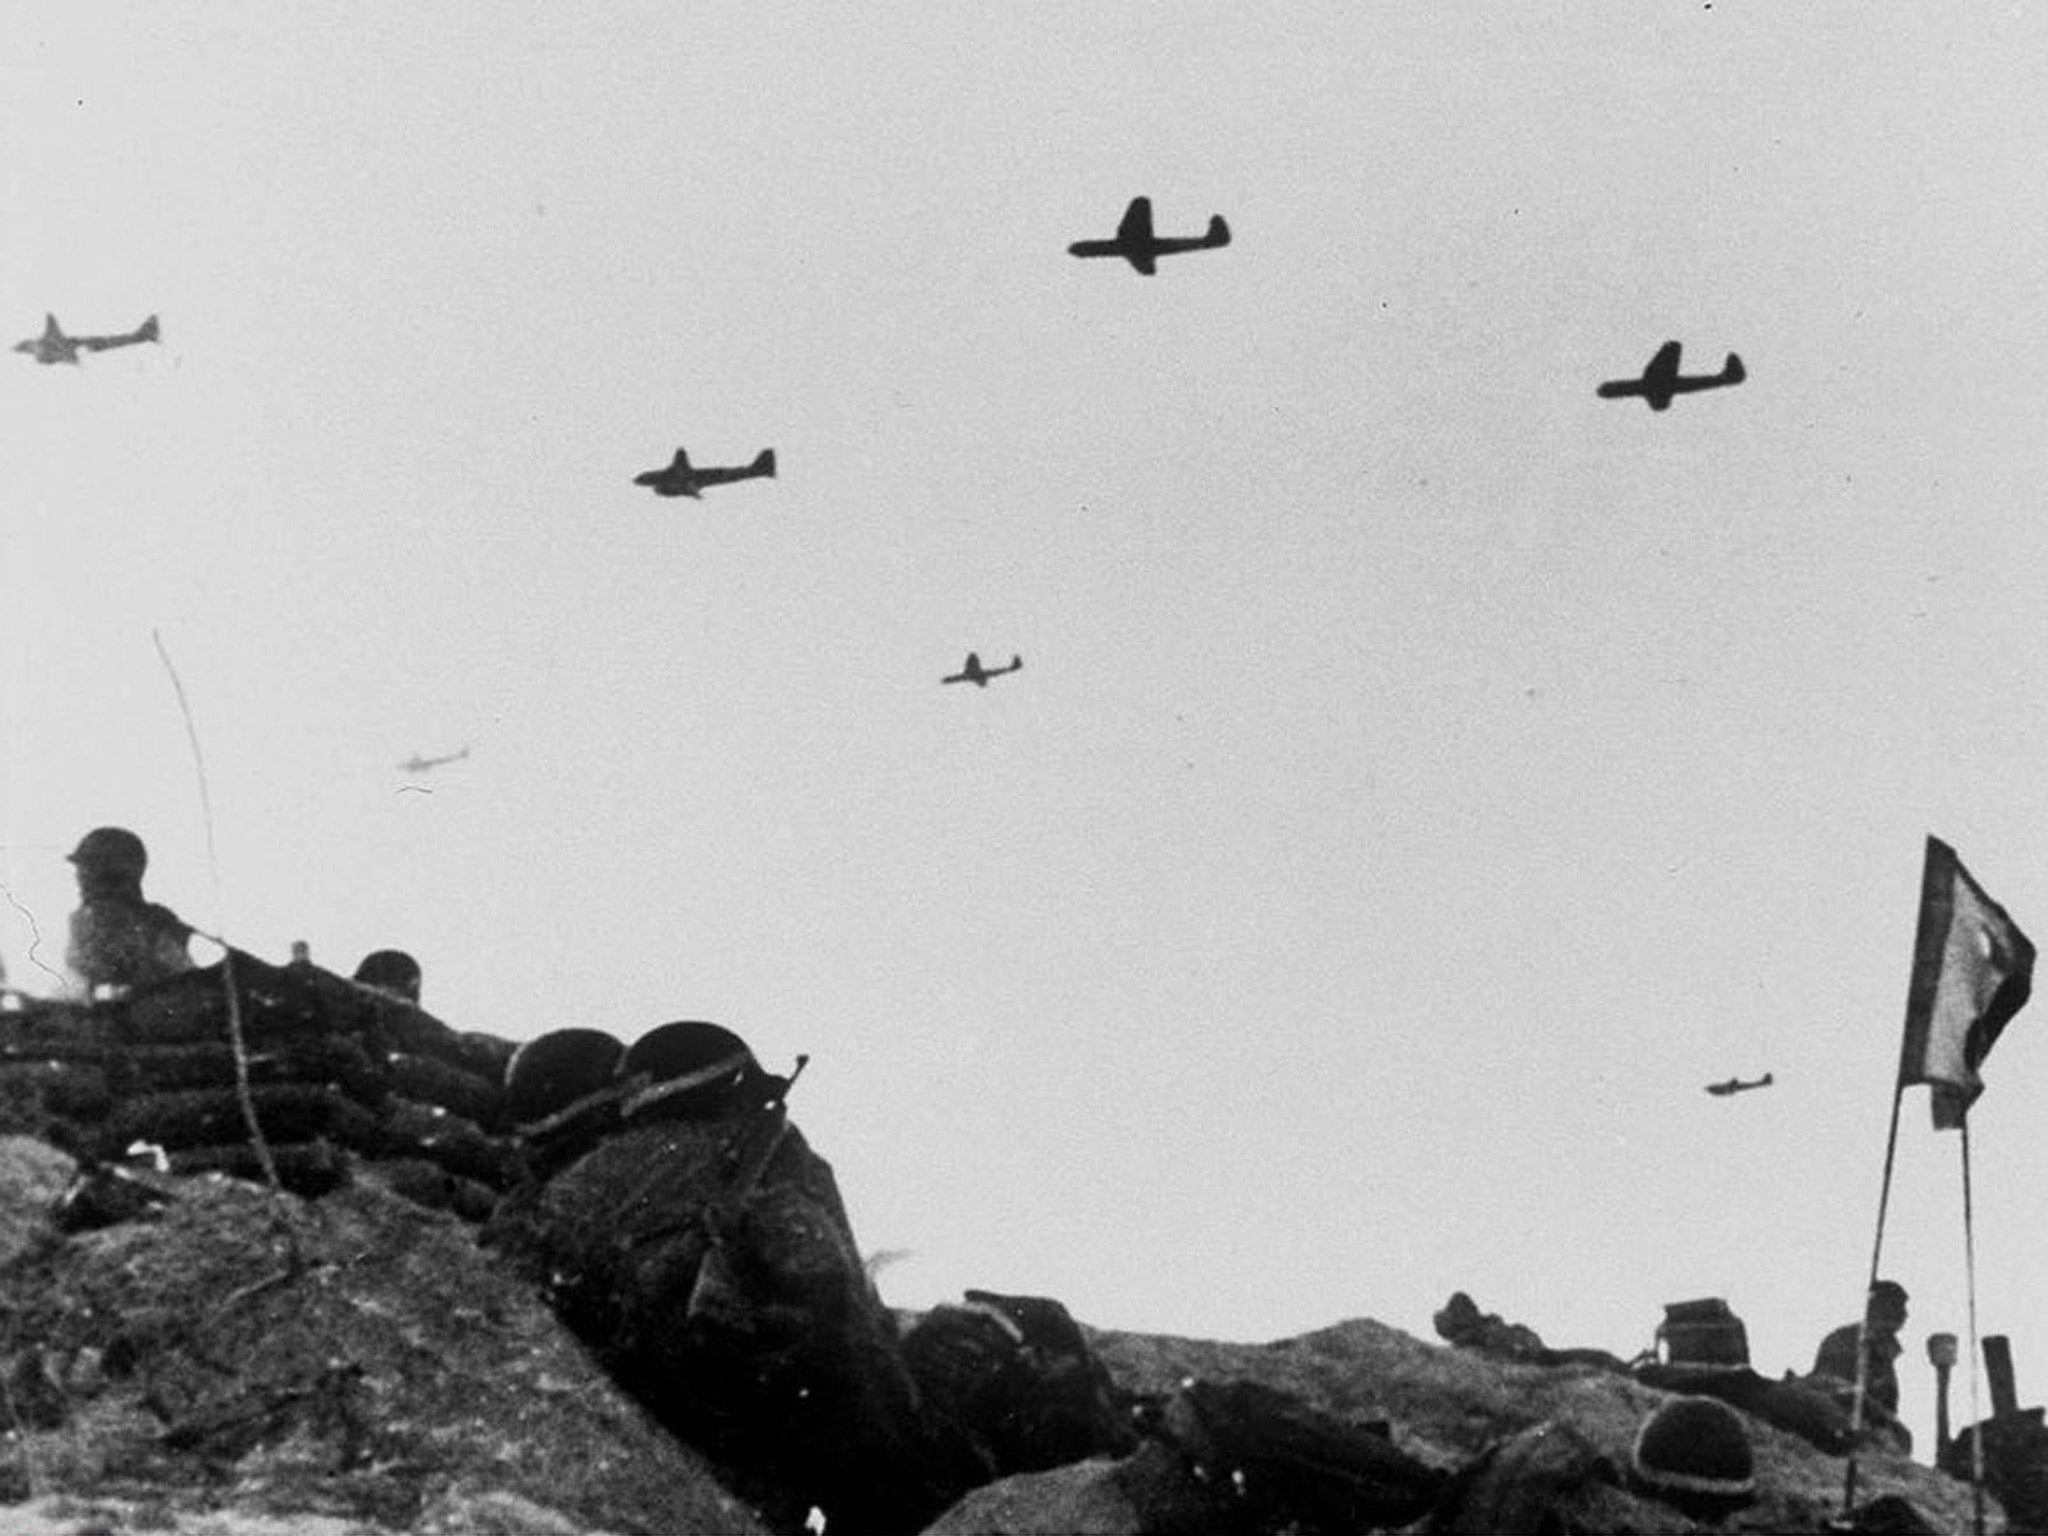 Allied aircraft fly over Normandy during the D-Day invasion in 1944